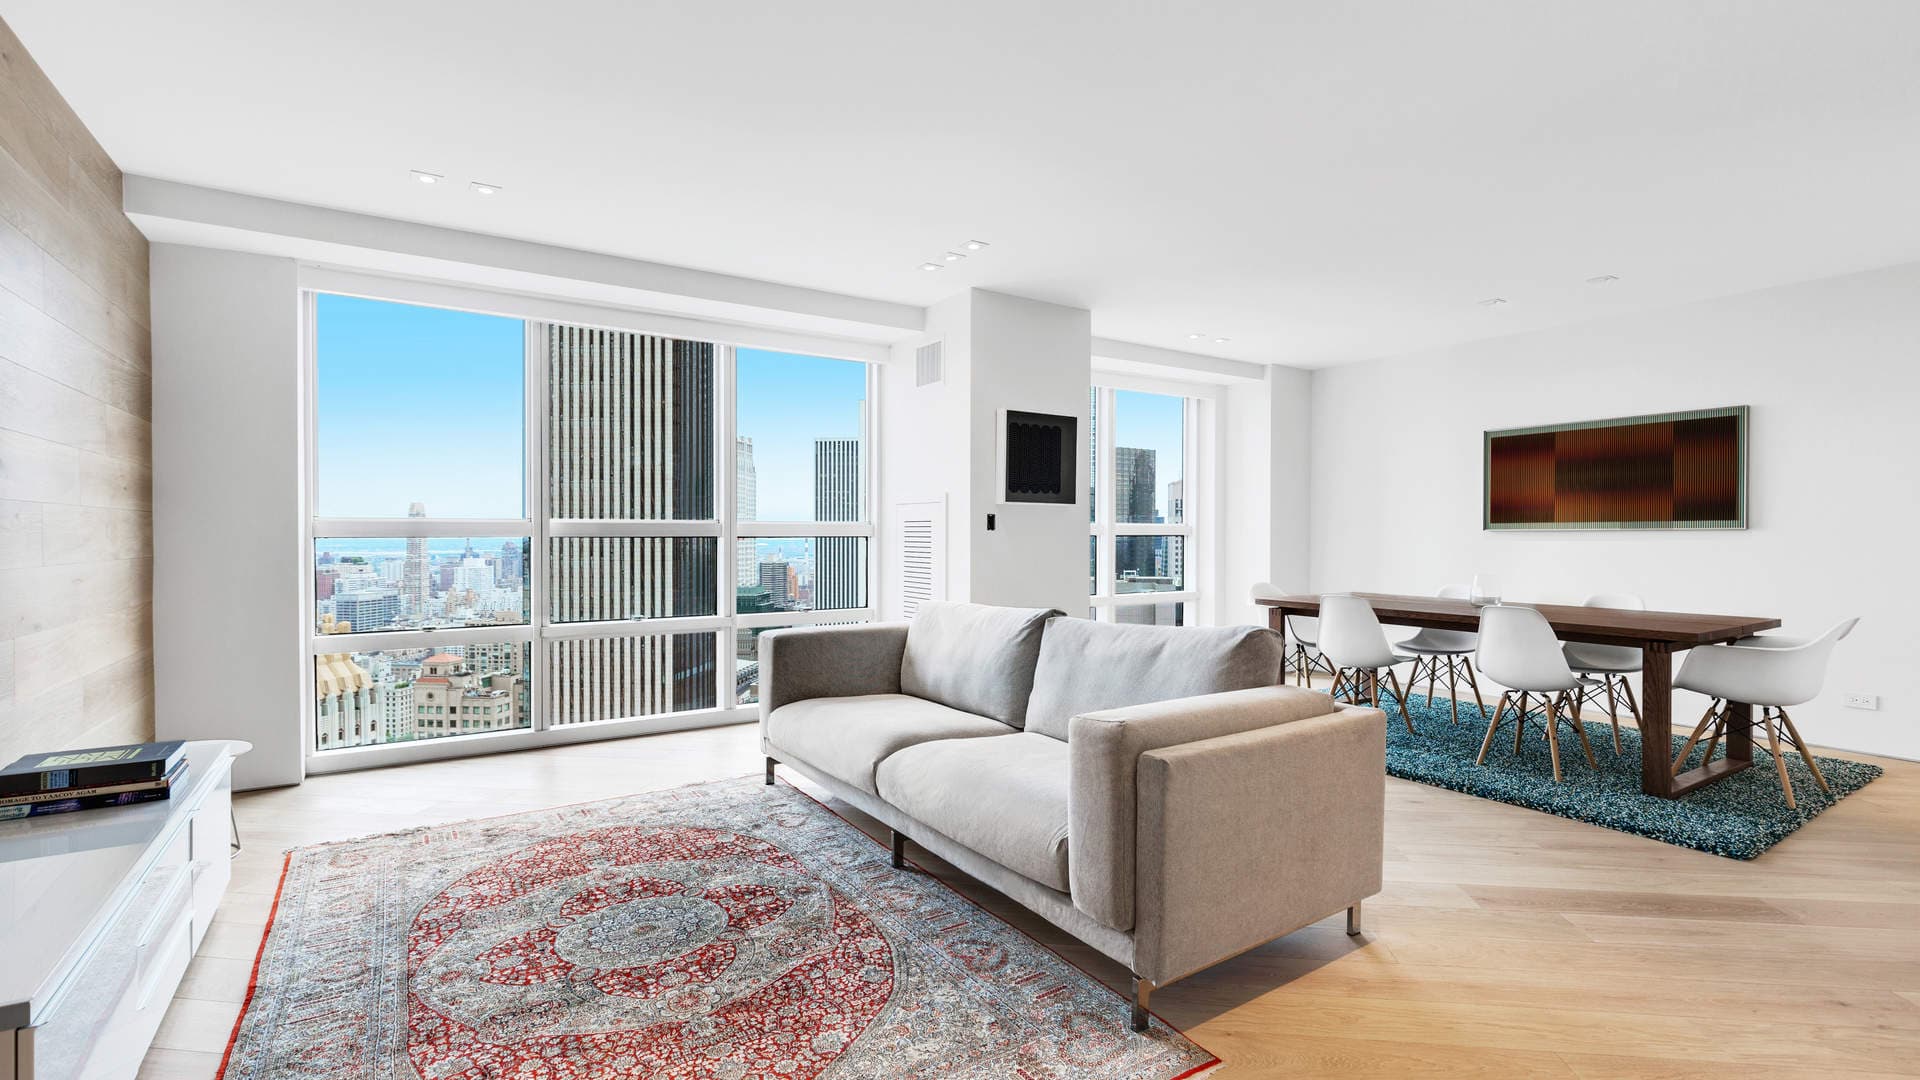 2 Bedroom Apartment For Sale 146 West 57th Street Lp01362 Be8d7bcb0ad5280.jpg